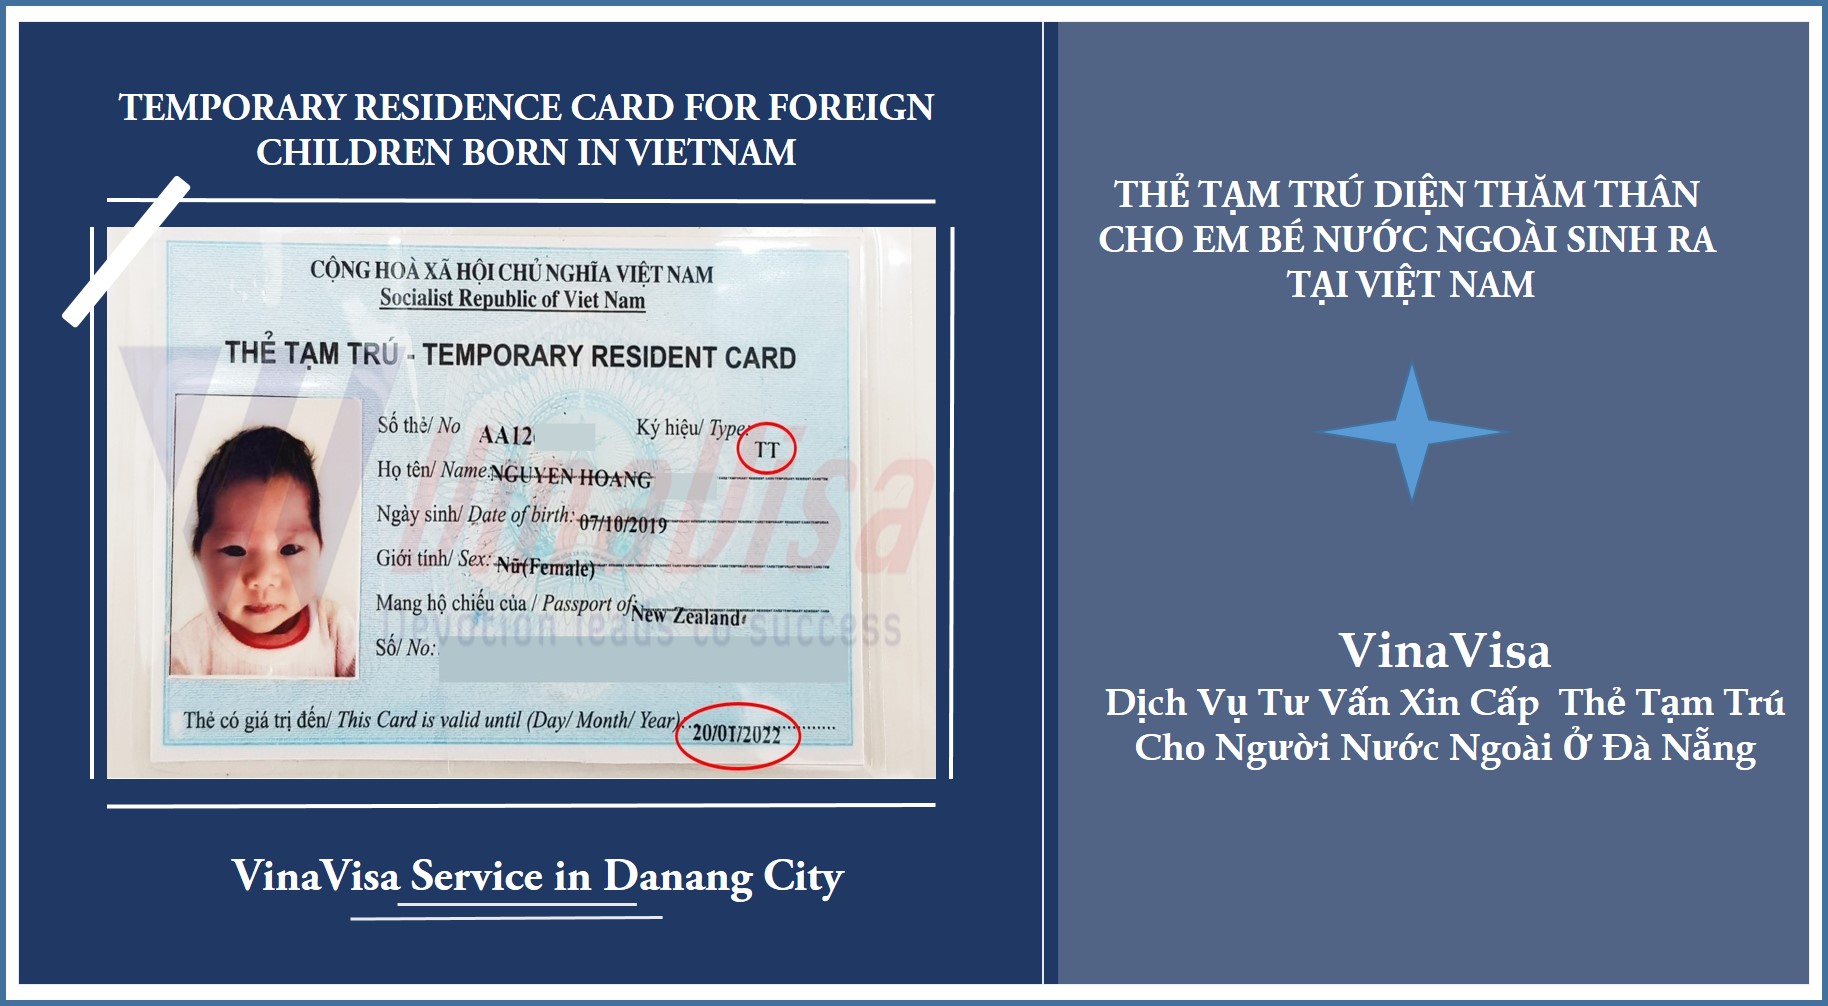 TEMPORARY RESIDENCE CARD FOR FOREIGN CHILDREN BORN IN VIETNAM